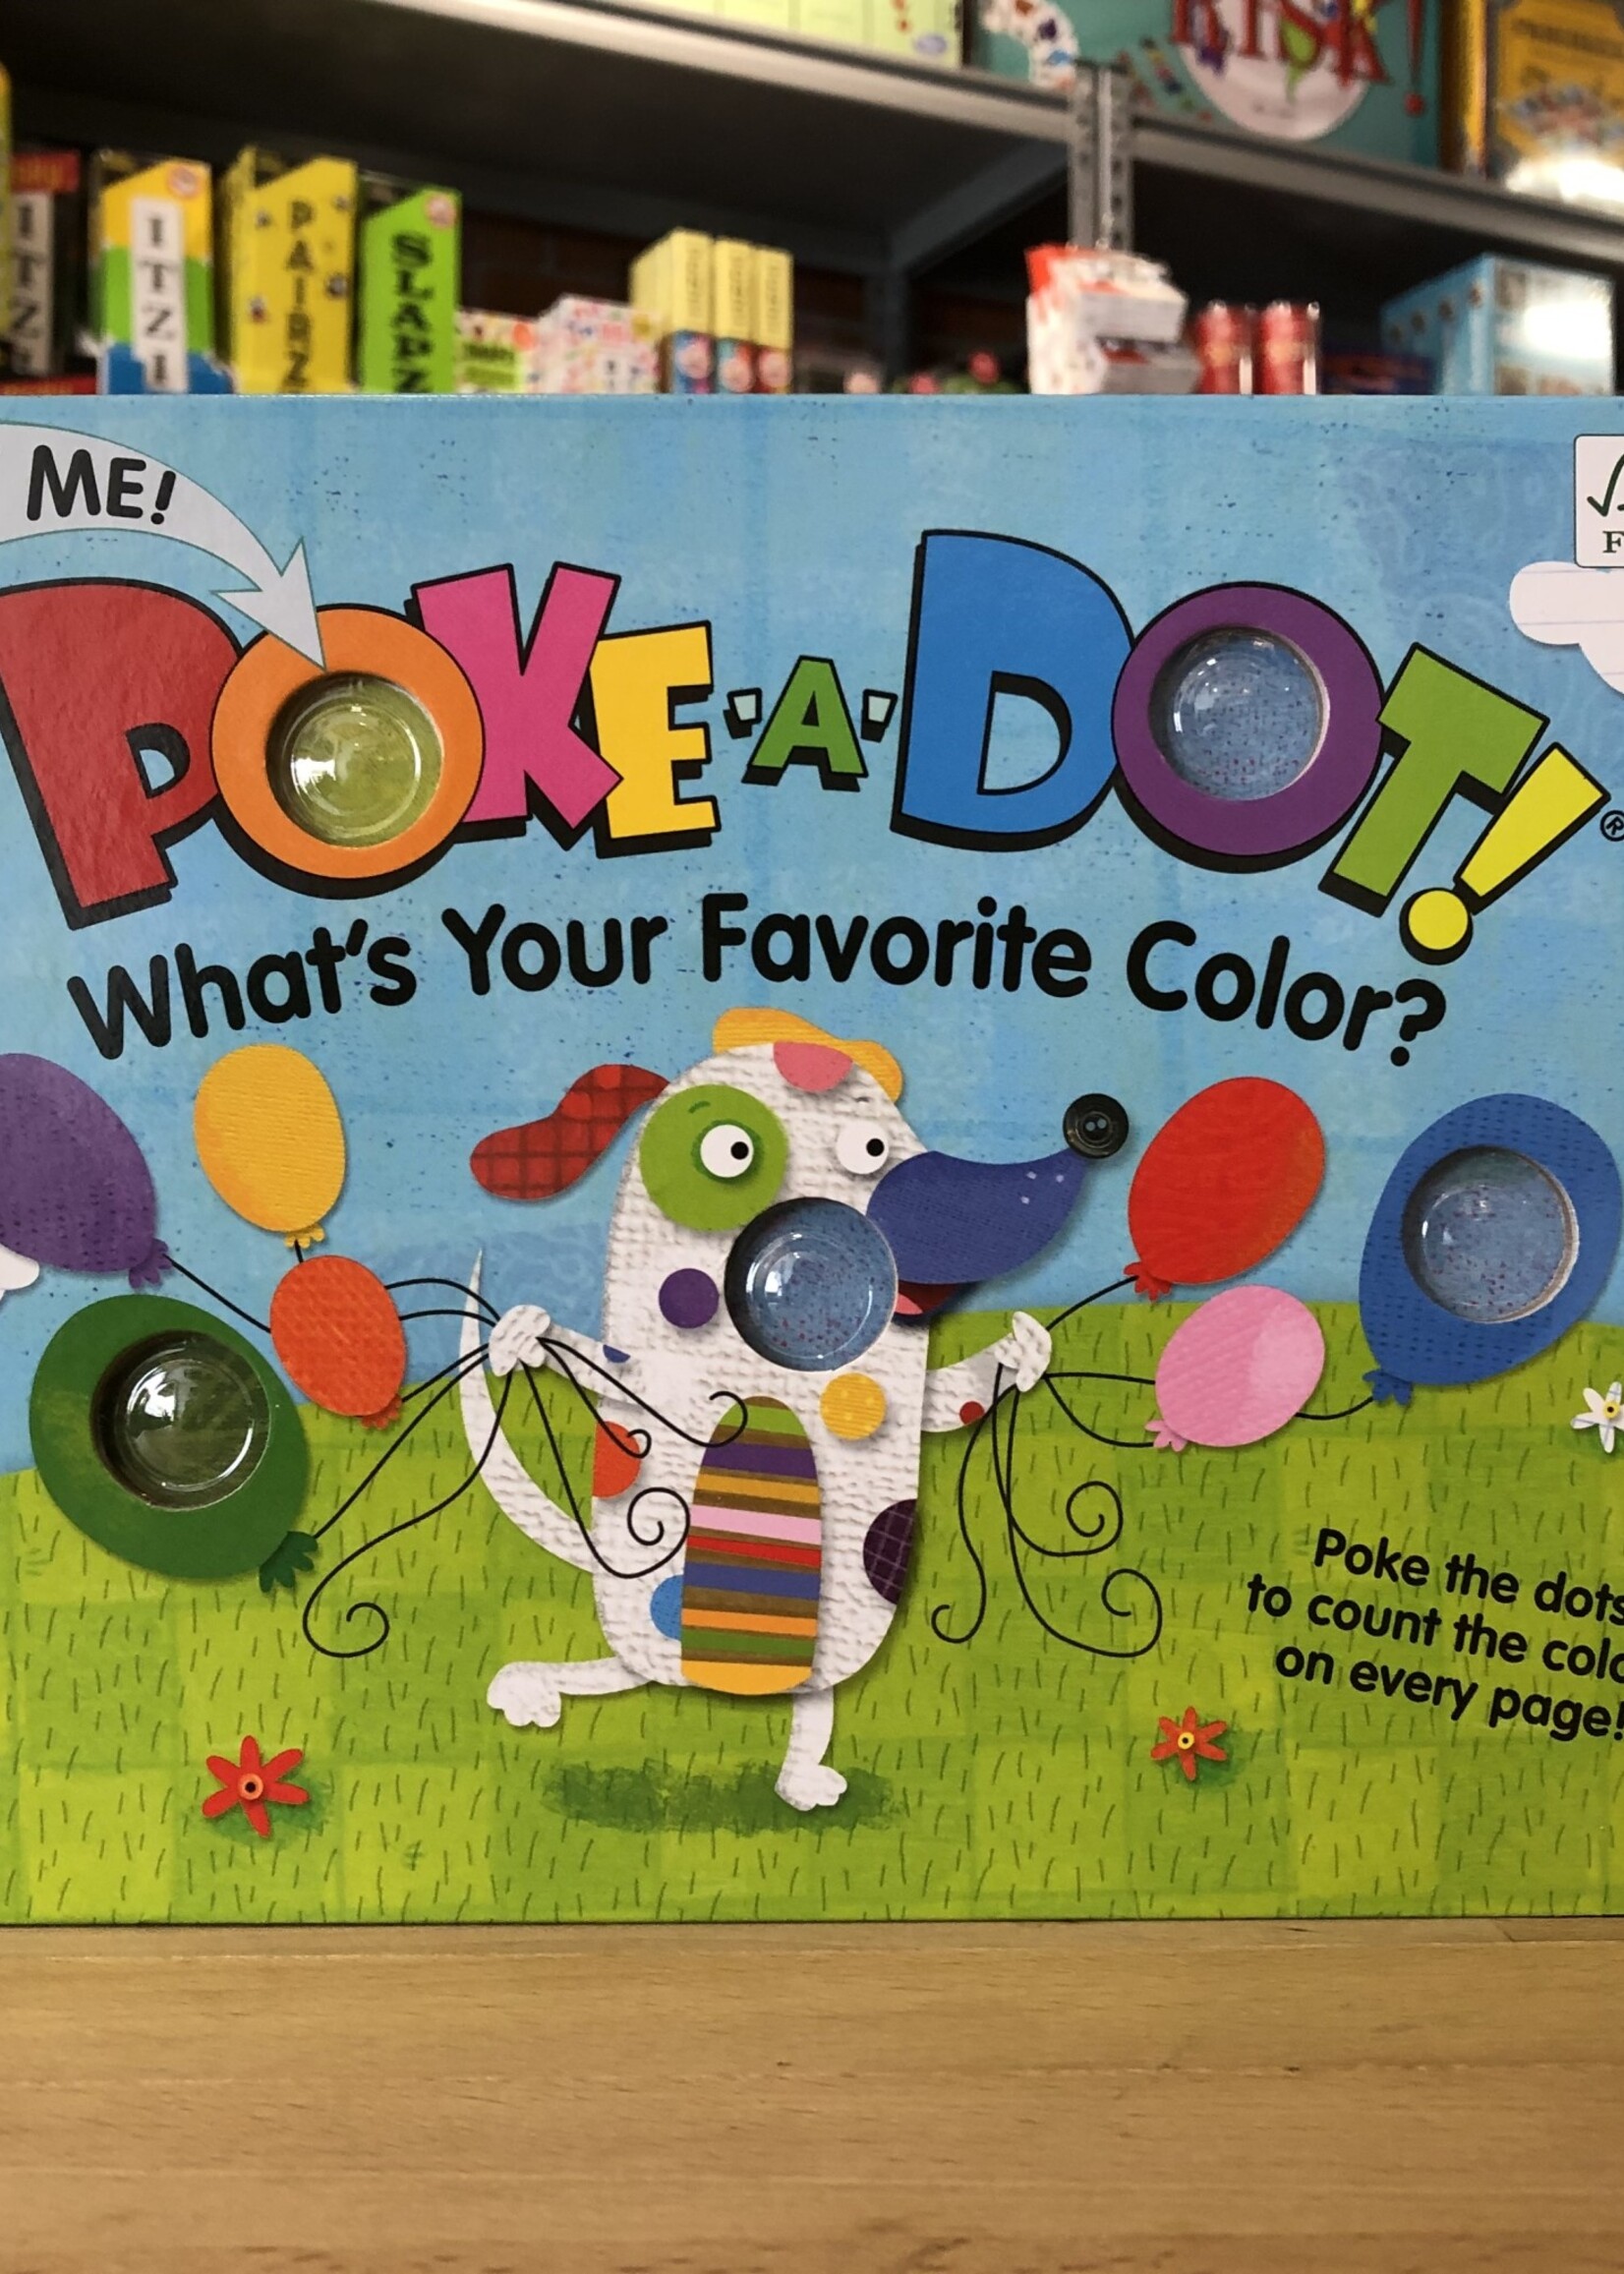 Poke-A-Dot - What's Your Favorite Color